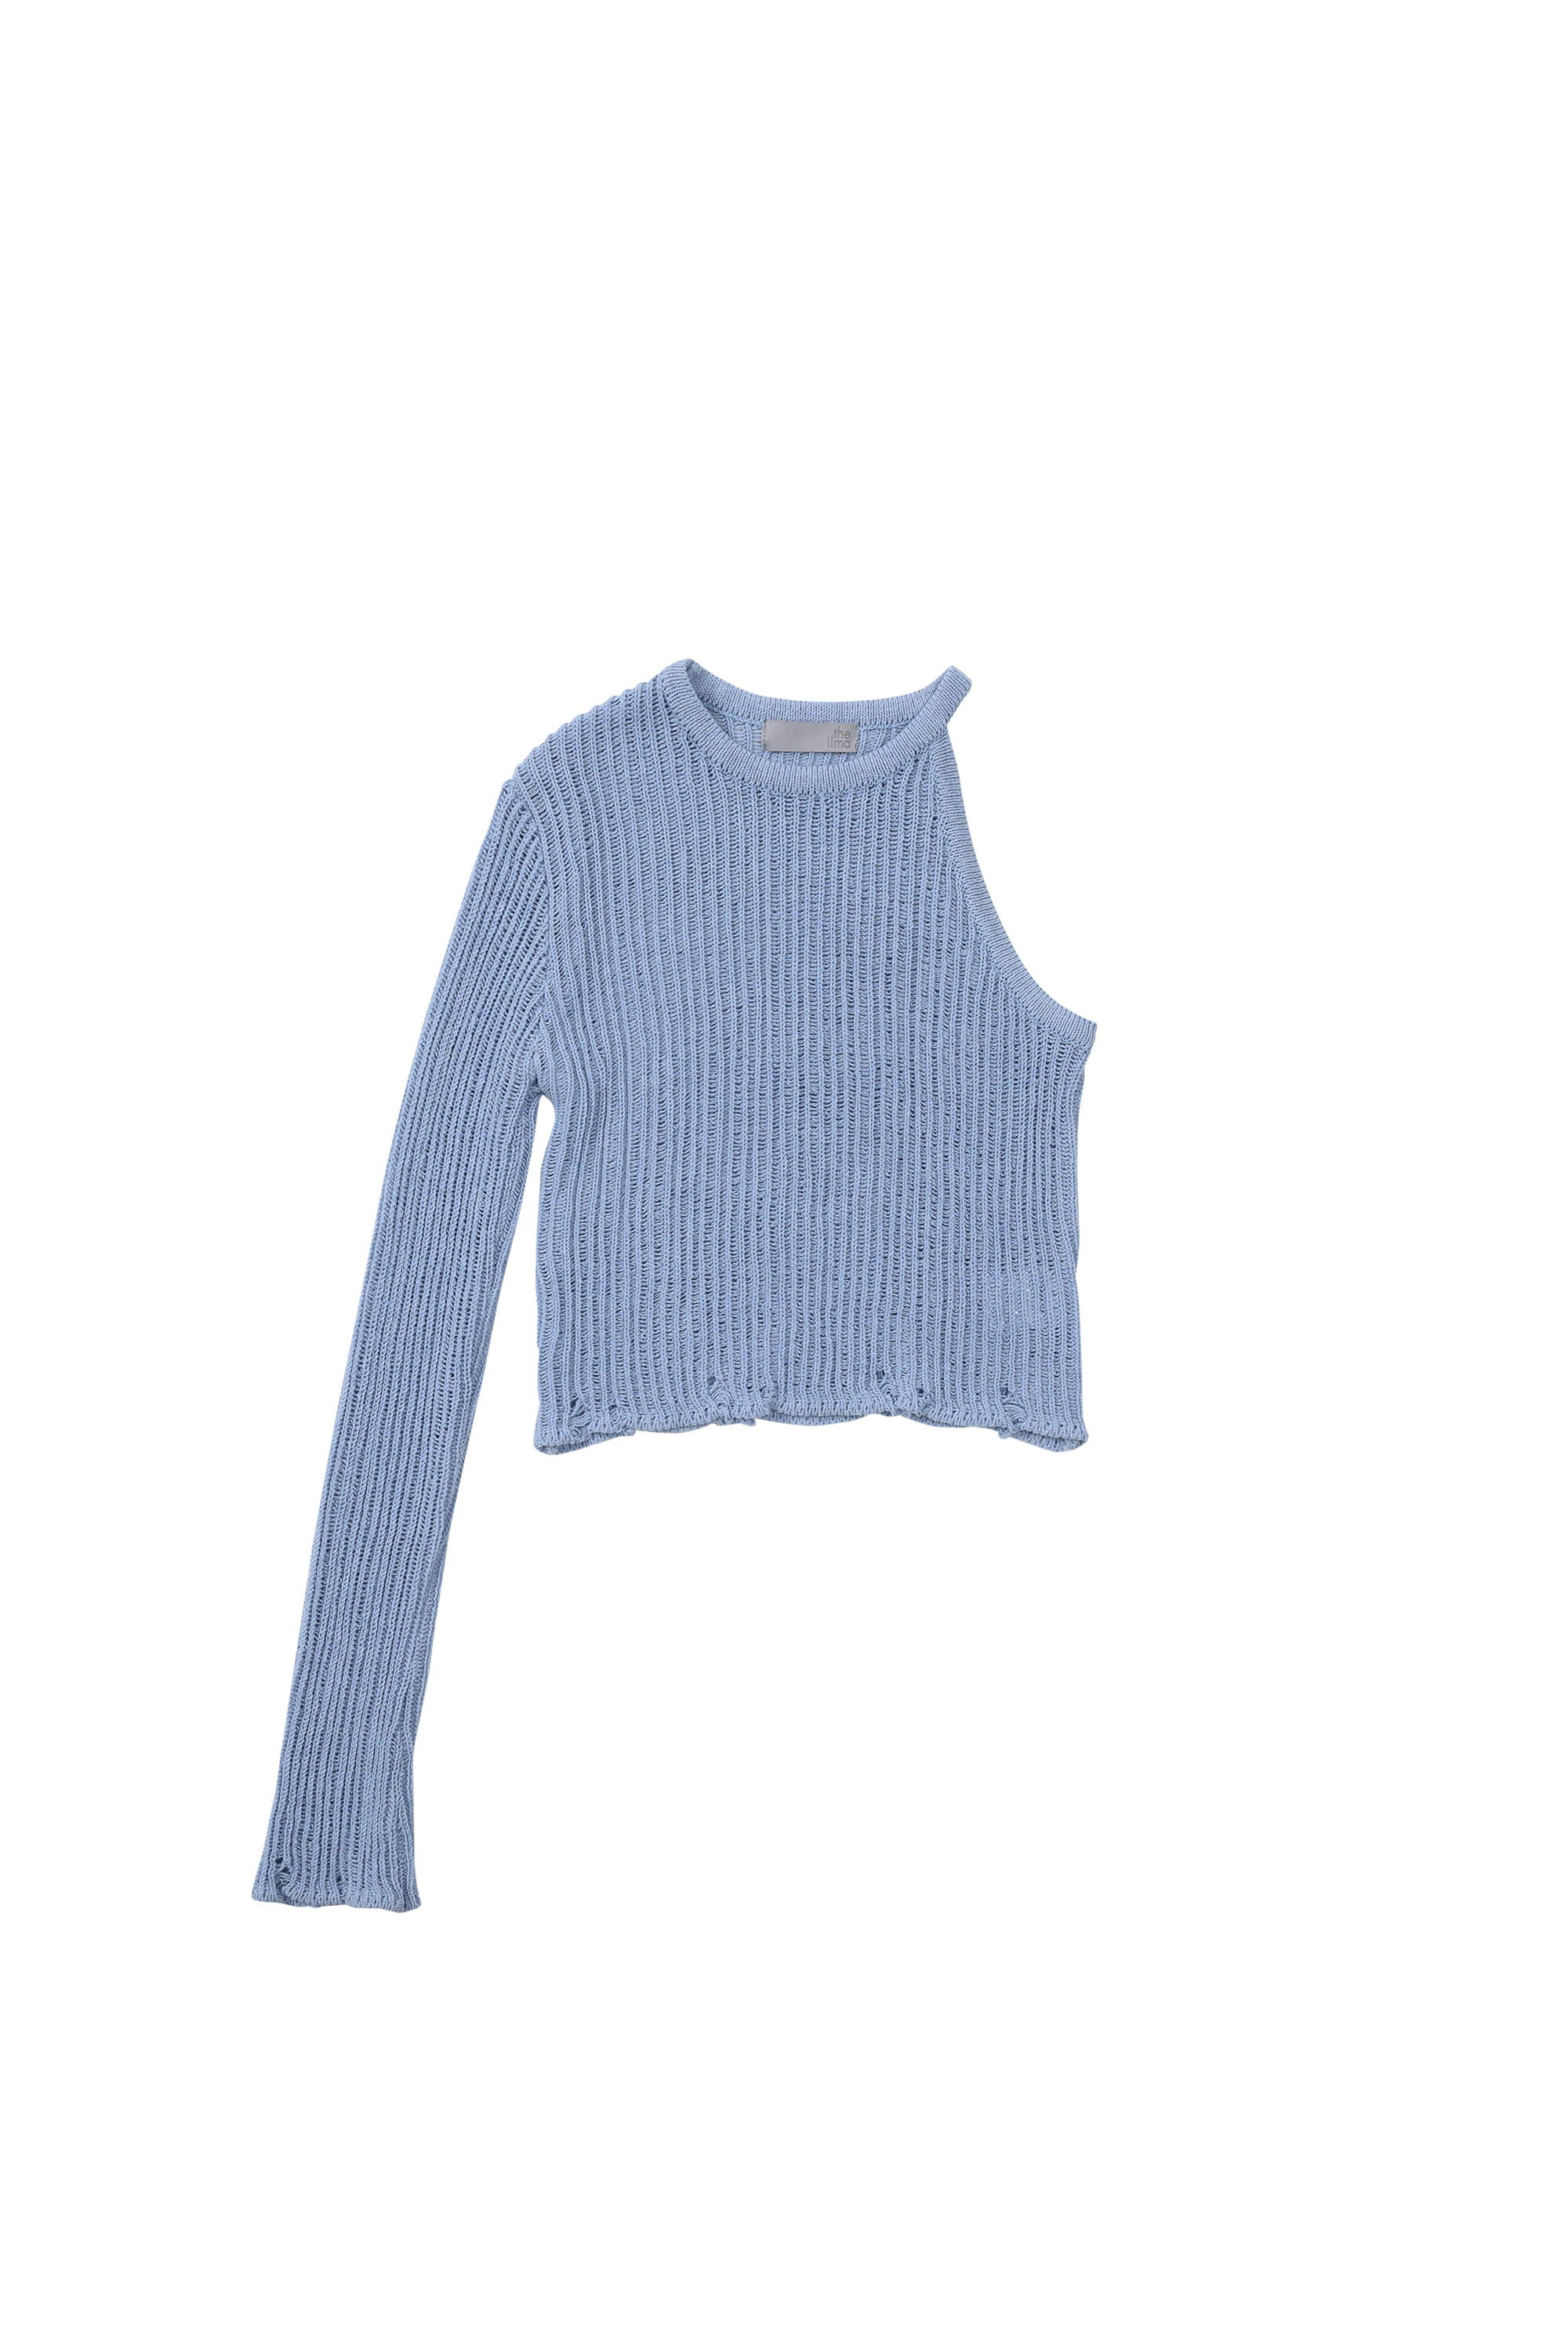 BLY UNBALANCE SLEEVE KNIT TOP (2 COLORS)